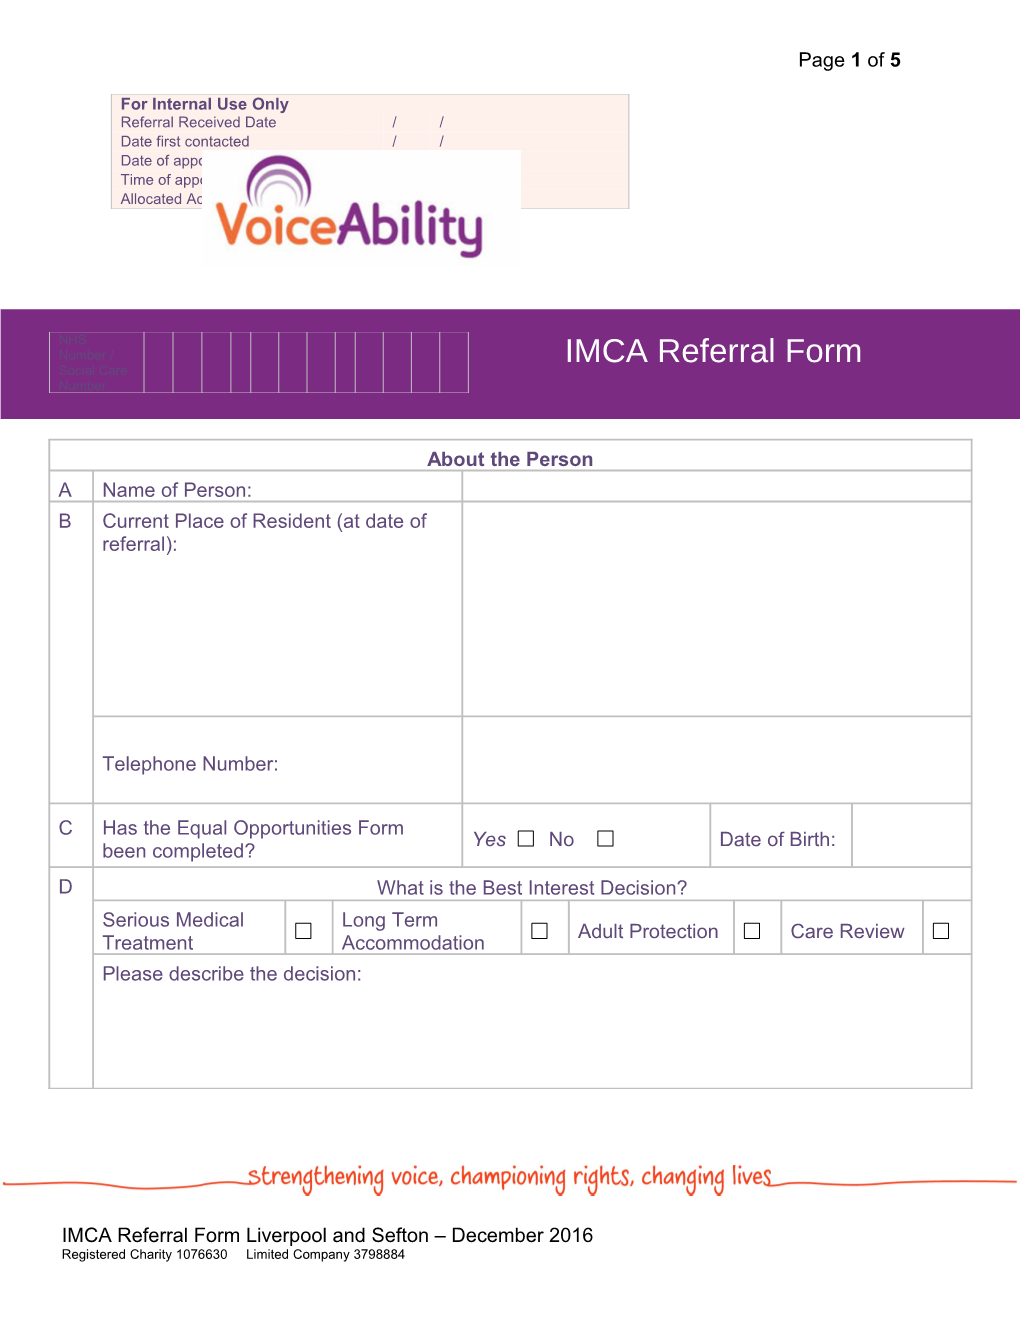 IMCA Referral Form Liverpool and Sefton December 2016